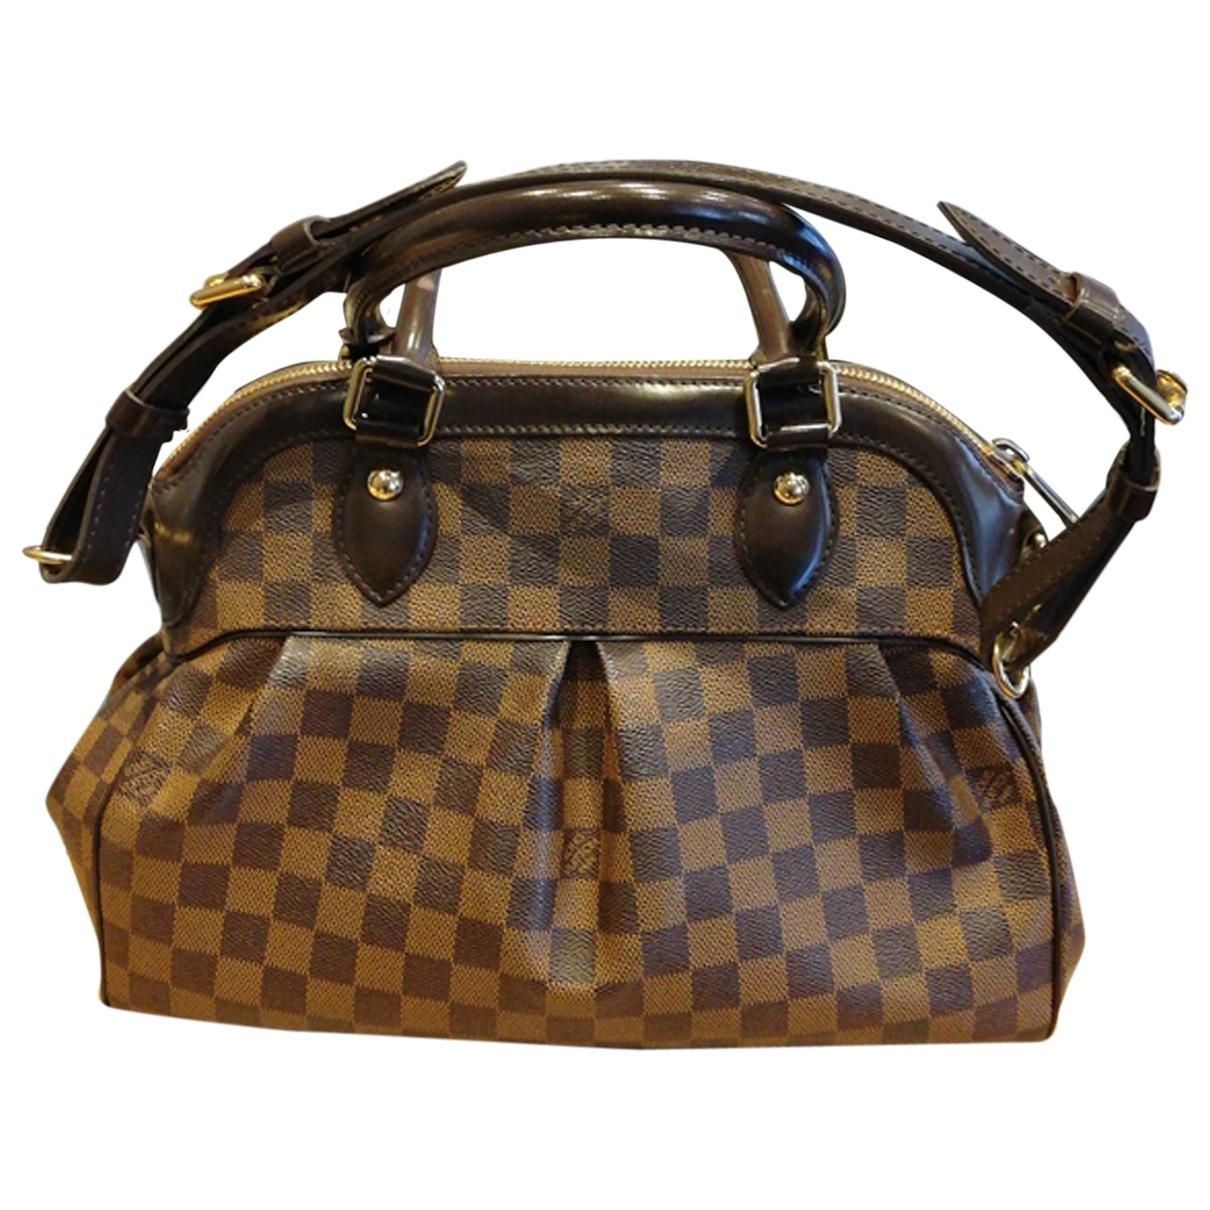 Lyst - Louis Vuitton Pre-owned Trevi Multicolour Leather Handbags in Black